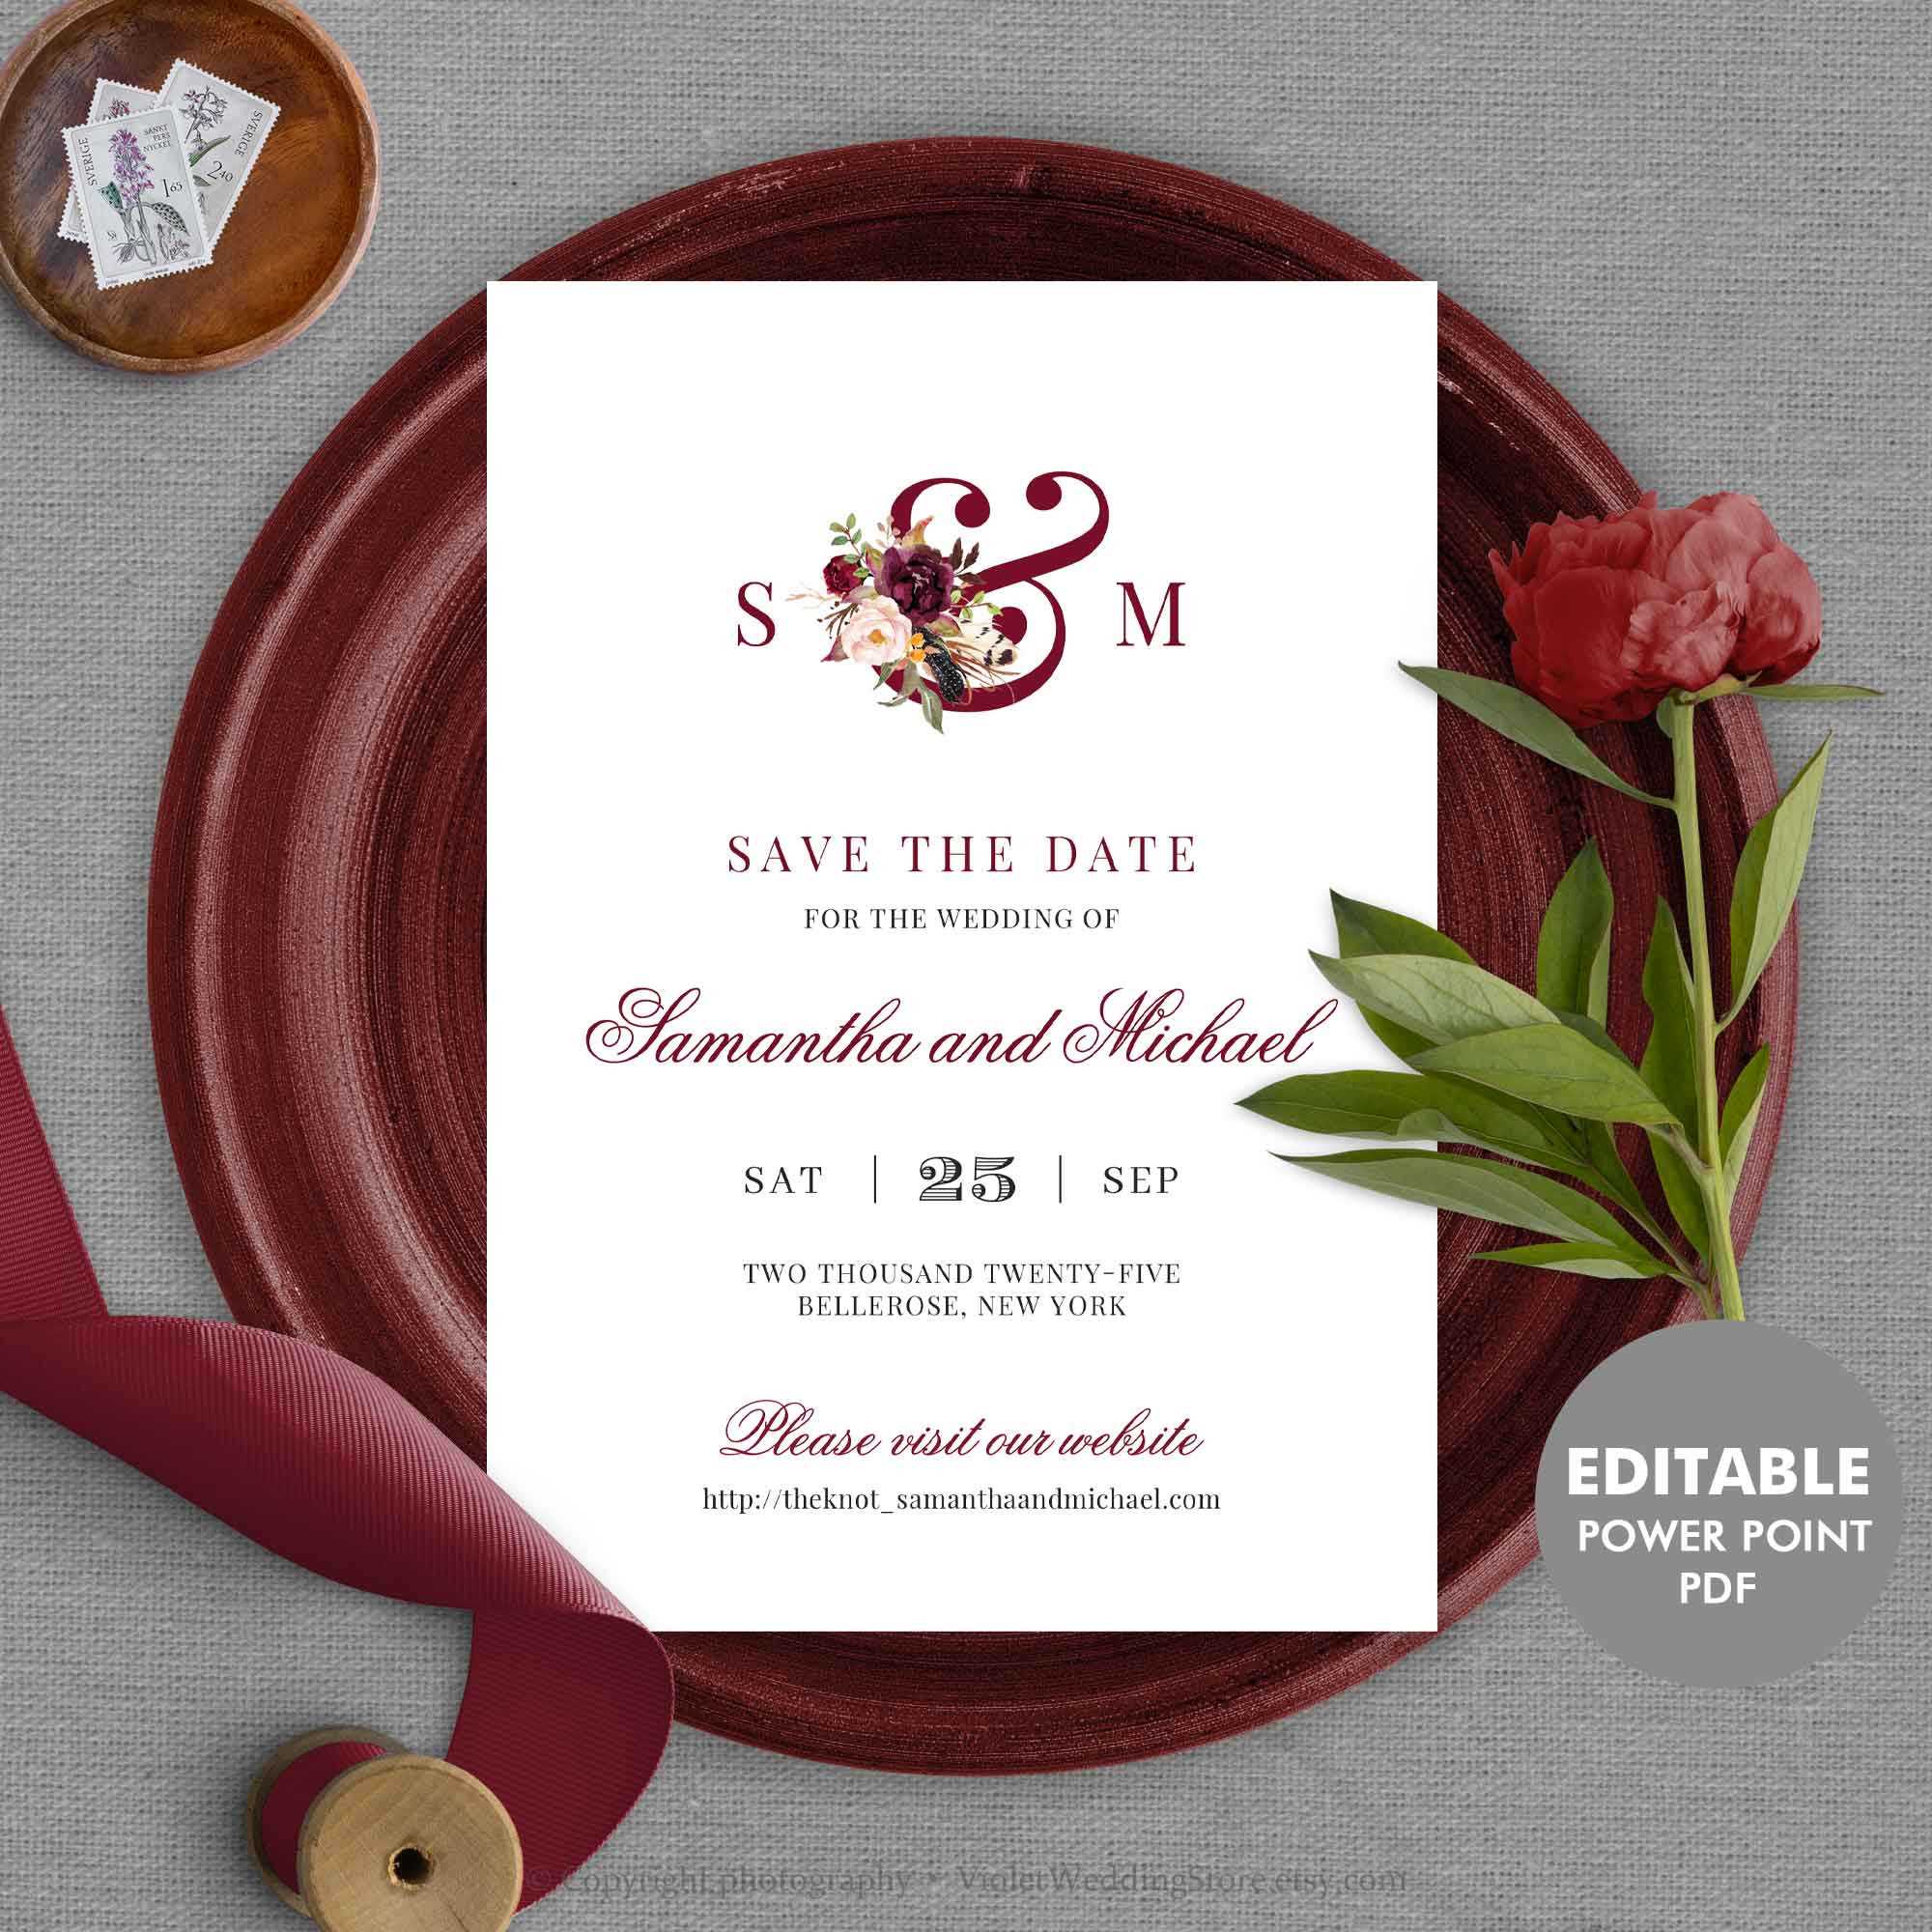 Burgundy Save The Date Card Template, Editable Monogram Save The Date,  Printable Wedding Save The Date Instant Download Mar1 Intended For Save The Date Powerpoint Template